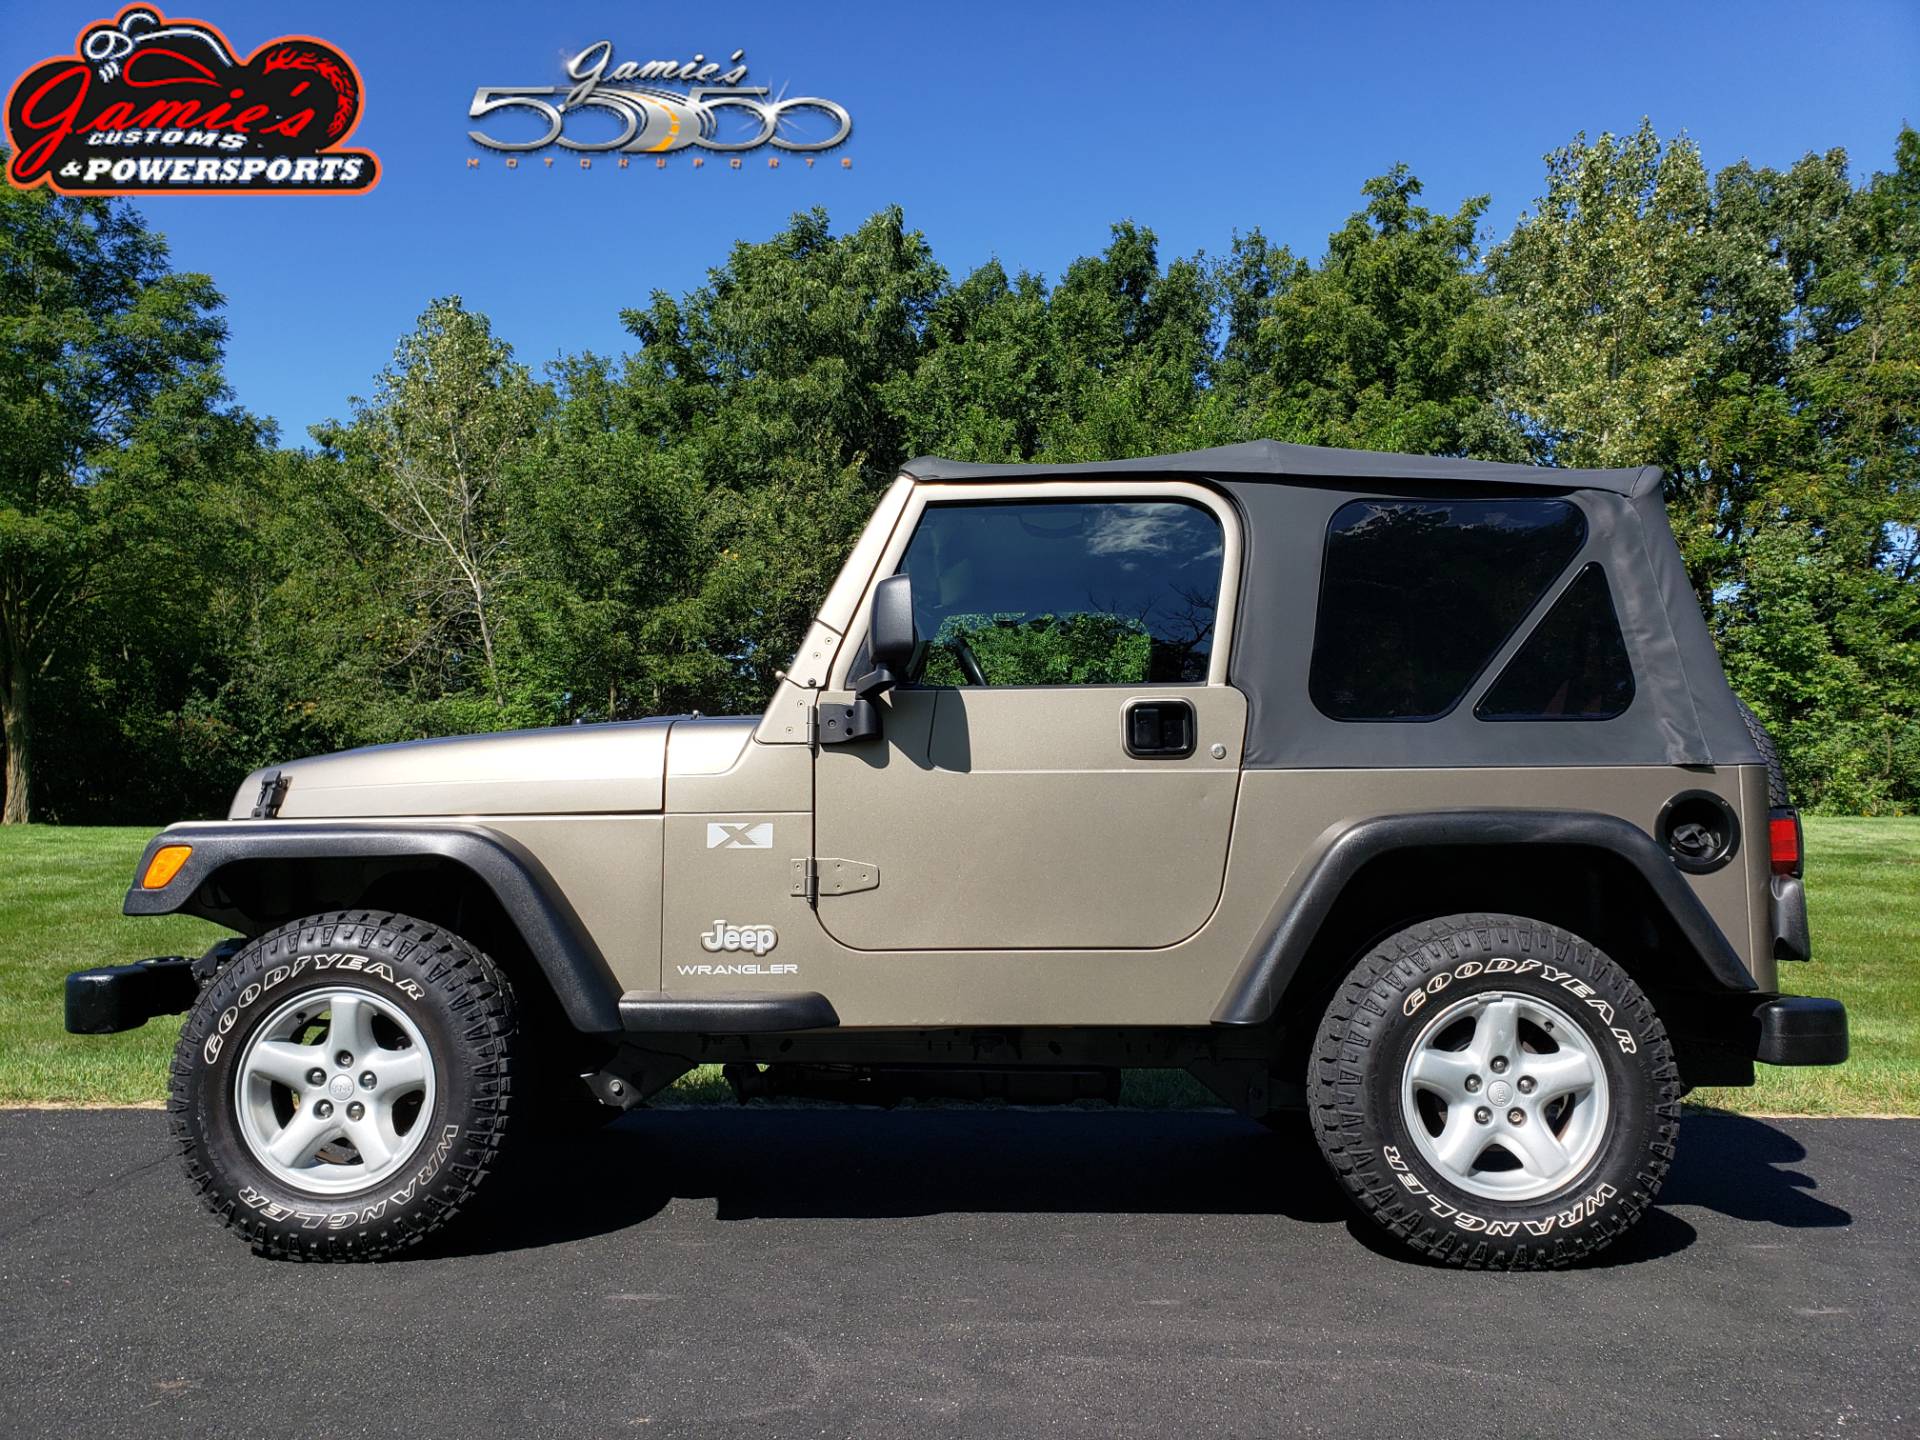 2003 Jeep Wrangler X 4WD 2dr SUV in Big Bend, Wisconsin - Photo 1